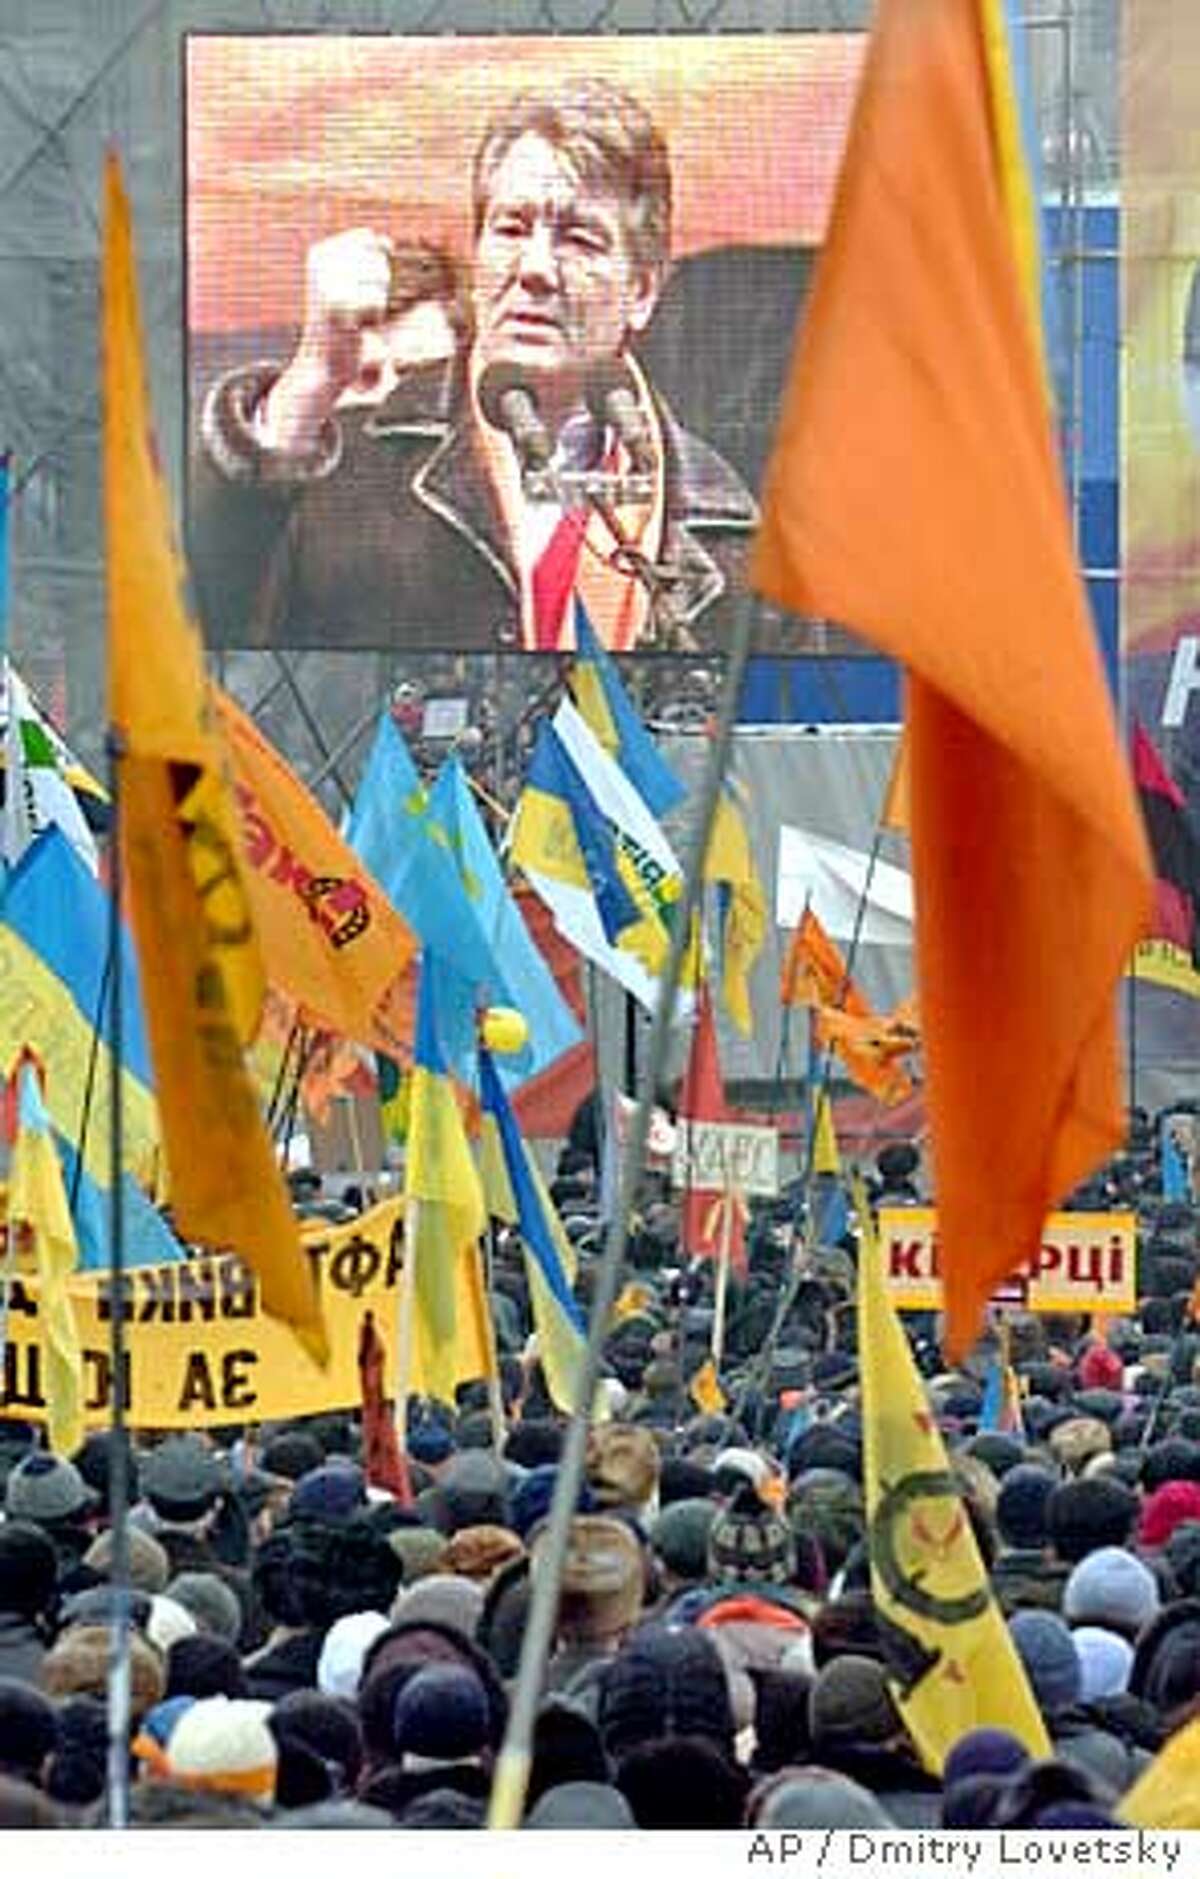 Opposition presidential candidate Viktor Yushchenko supporters watch a huge TV screen showing him speaking during a mass rally in downtown, Kiev, Sunday, Nov. 28, 2004, with various national flags and campaigne posters with orange Yushchenko flags. Yushchenko, who claims he was cheated out of victory in the Nov. 21 run-off election, is demanding a new vote. Hundreds of thousands of demonstrators have jammed downtown Kiev for a week to support him. (AP Photo/Dmitry Lovetsky) Ran on: 11-29-2004 Supporters of opposition leader Viktor Yushchenko rally near the Ukrainian parliament in Kiev. Ran on: 11-29-2004 Supporters of opposition leader Viktor Yushchenko rally near the Ukrainian parliament in Kiev.